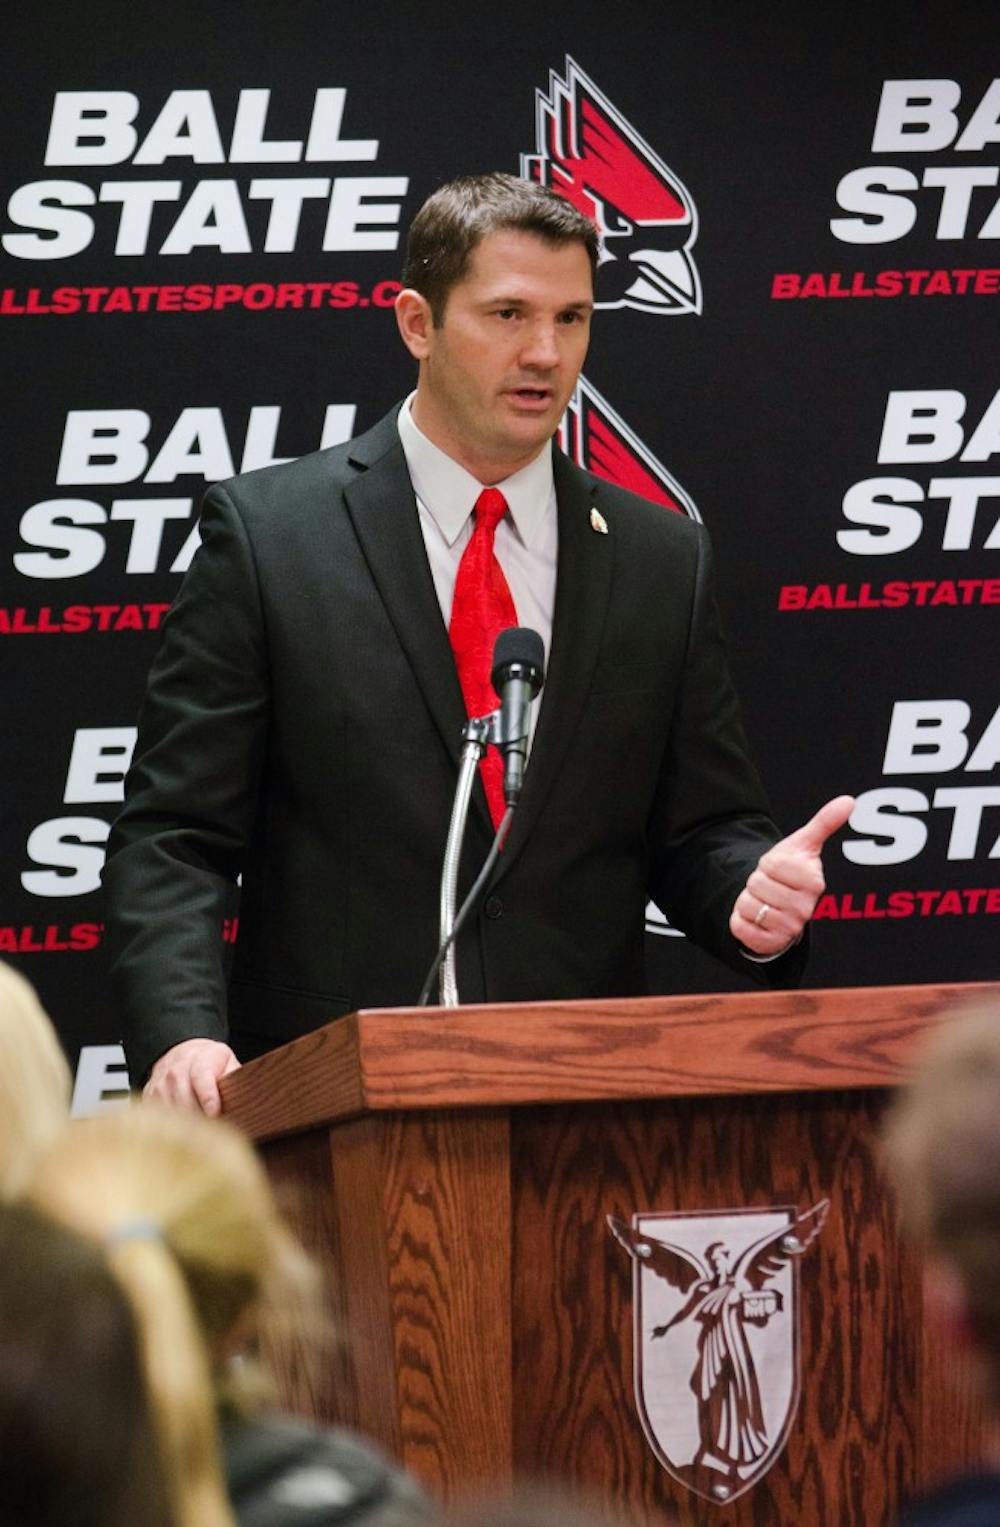 Ball State head football coach Mike Neu speaking at his introductory press conference on Jan. 07. DN PHOTO BY BRE DAUGHERTY